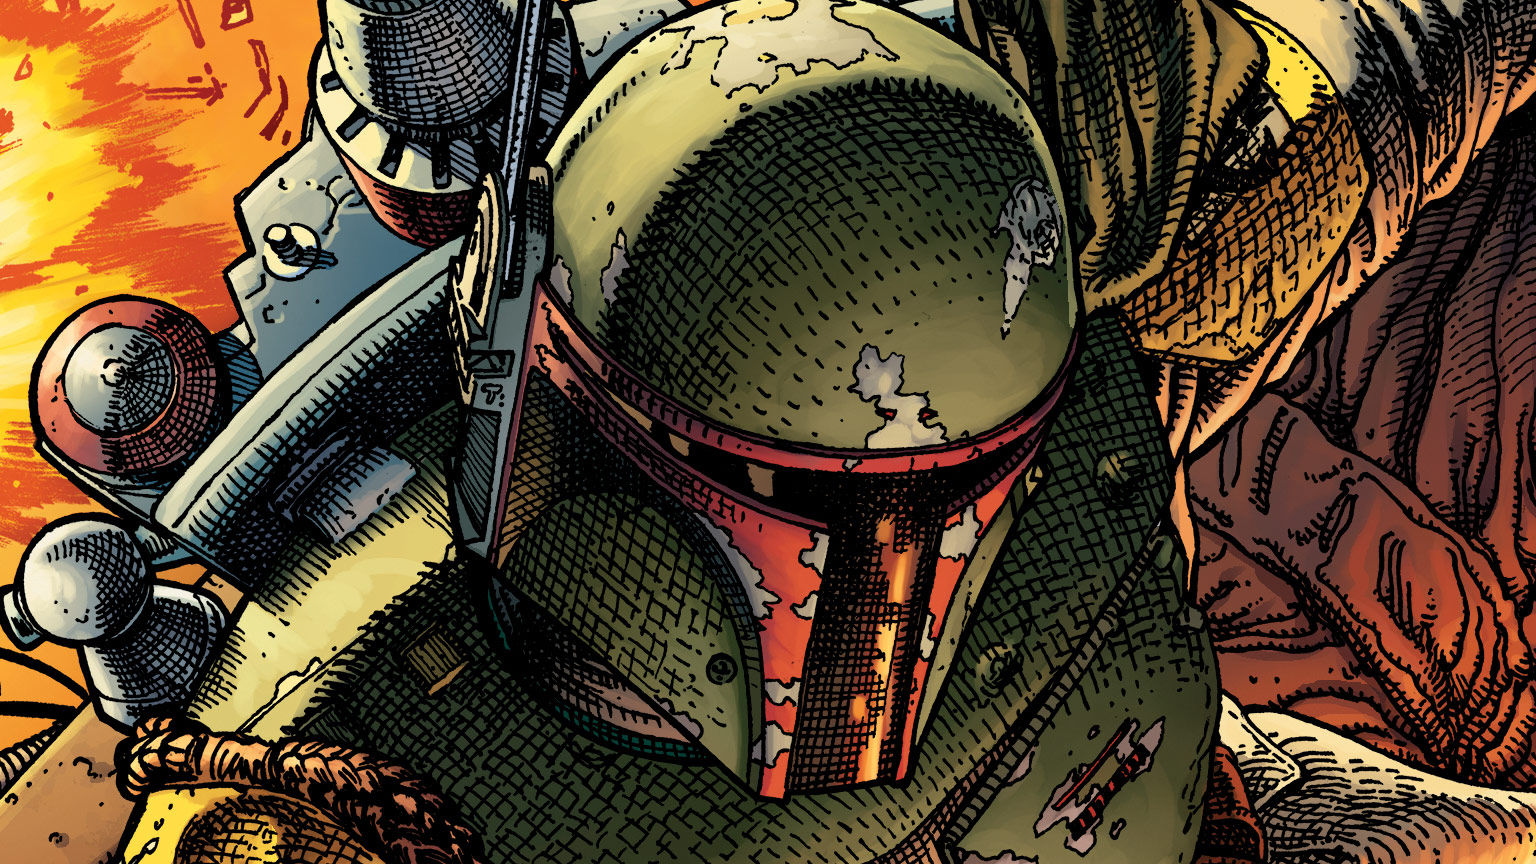 Boba Fett Looks to Deliver Han Solo in Marvel’s Star Wars: War of the Bounty Hunters Alpha #1 – Exclusive Preview